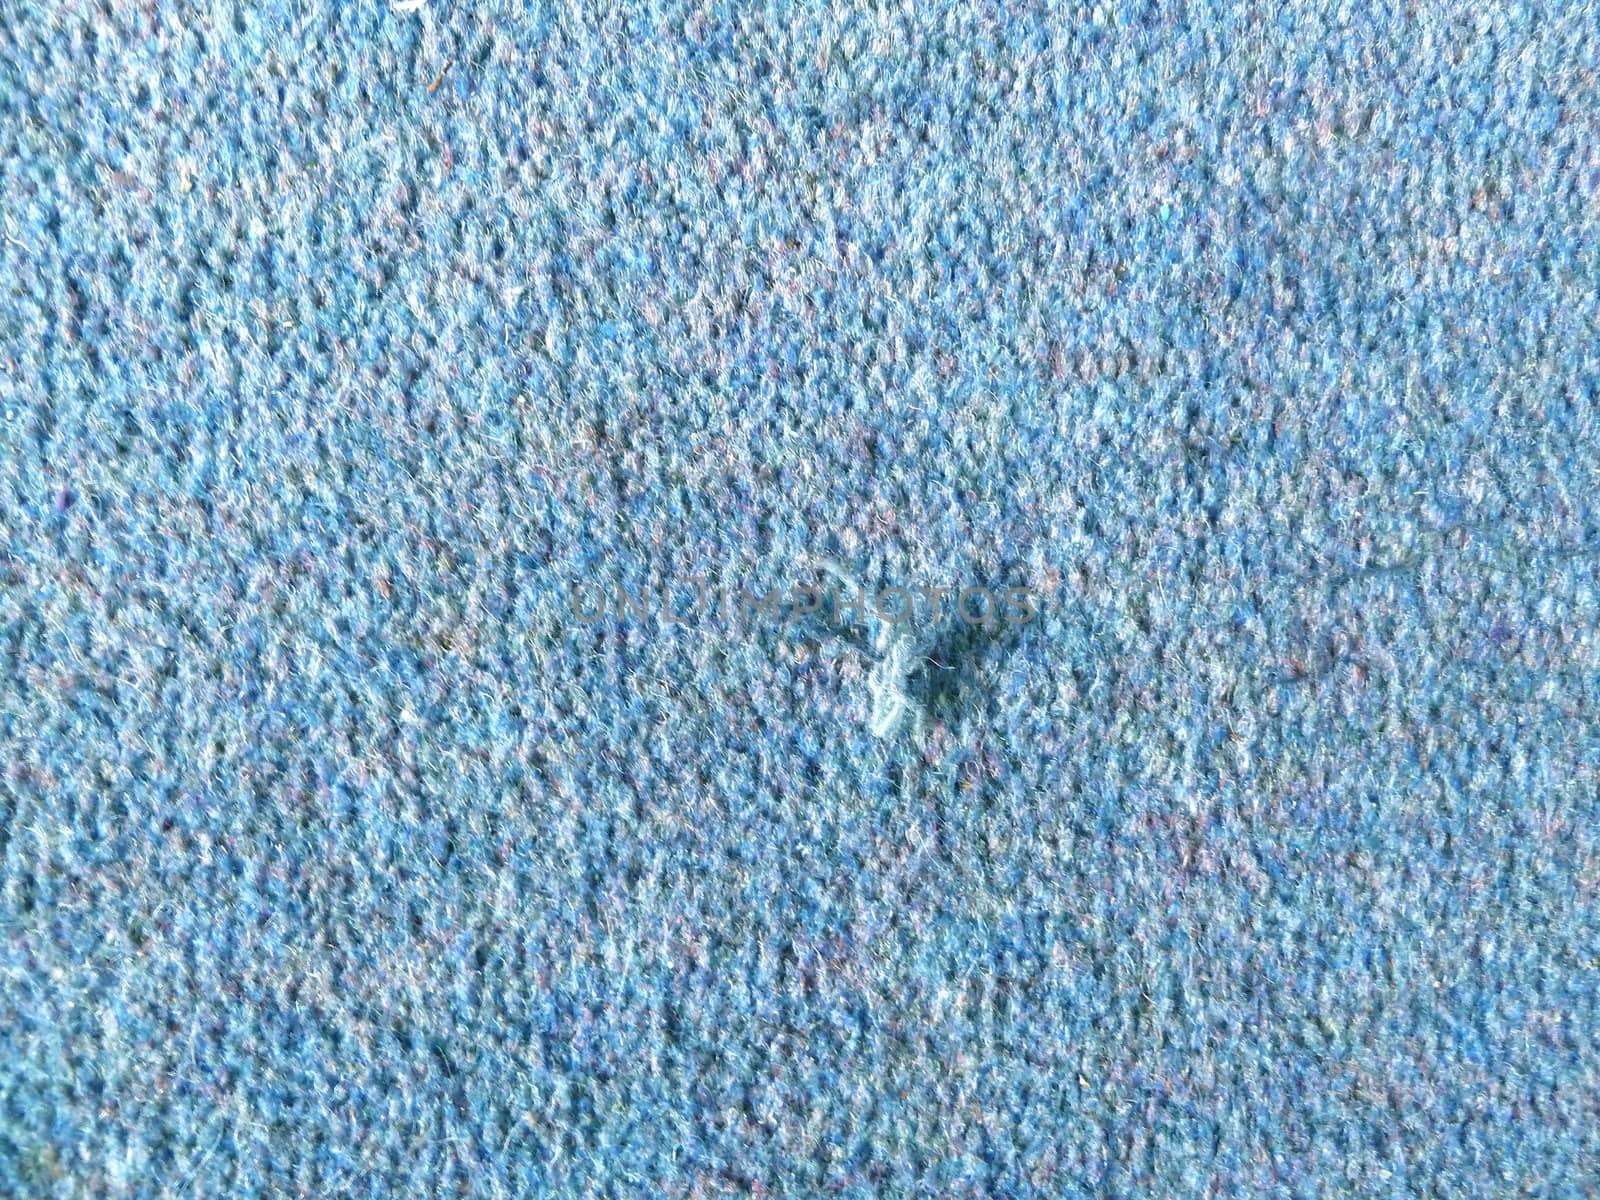 rough grungy blue surface as a background